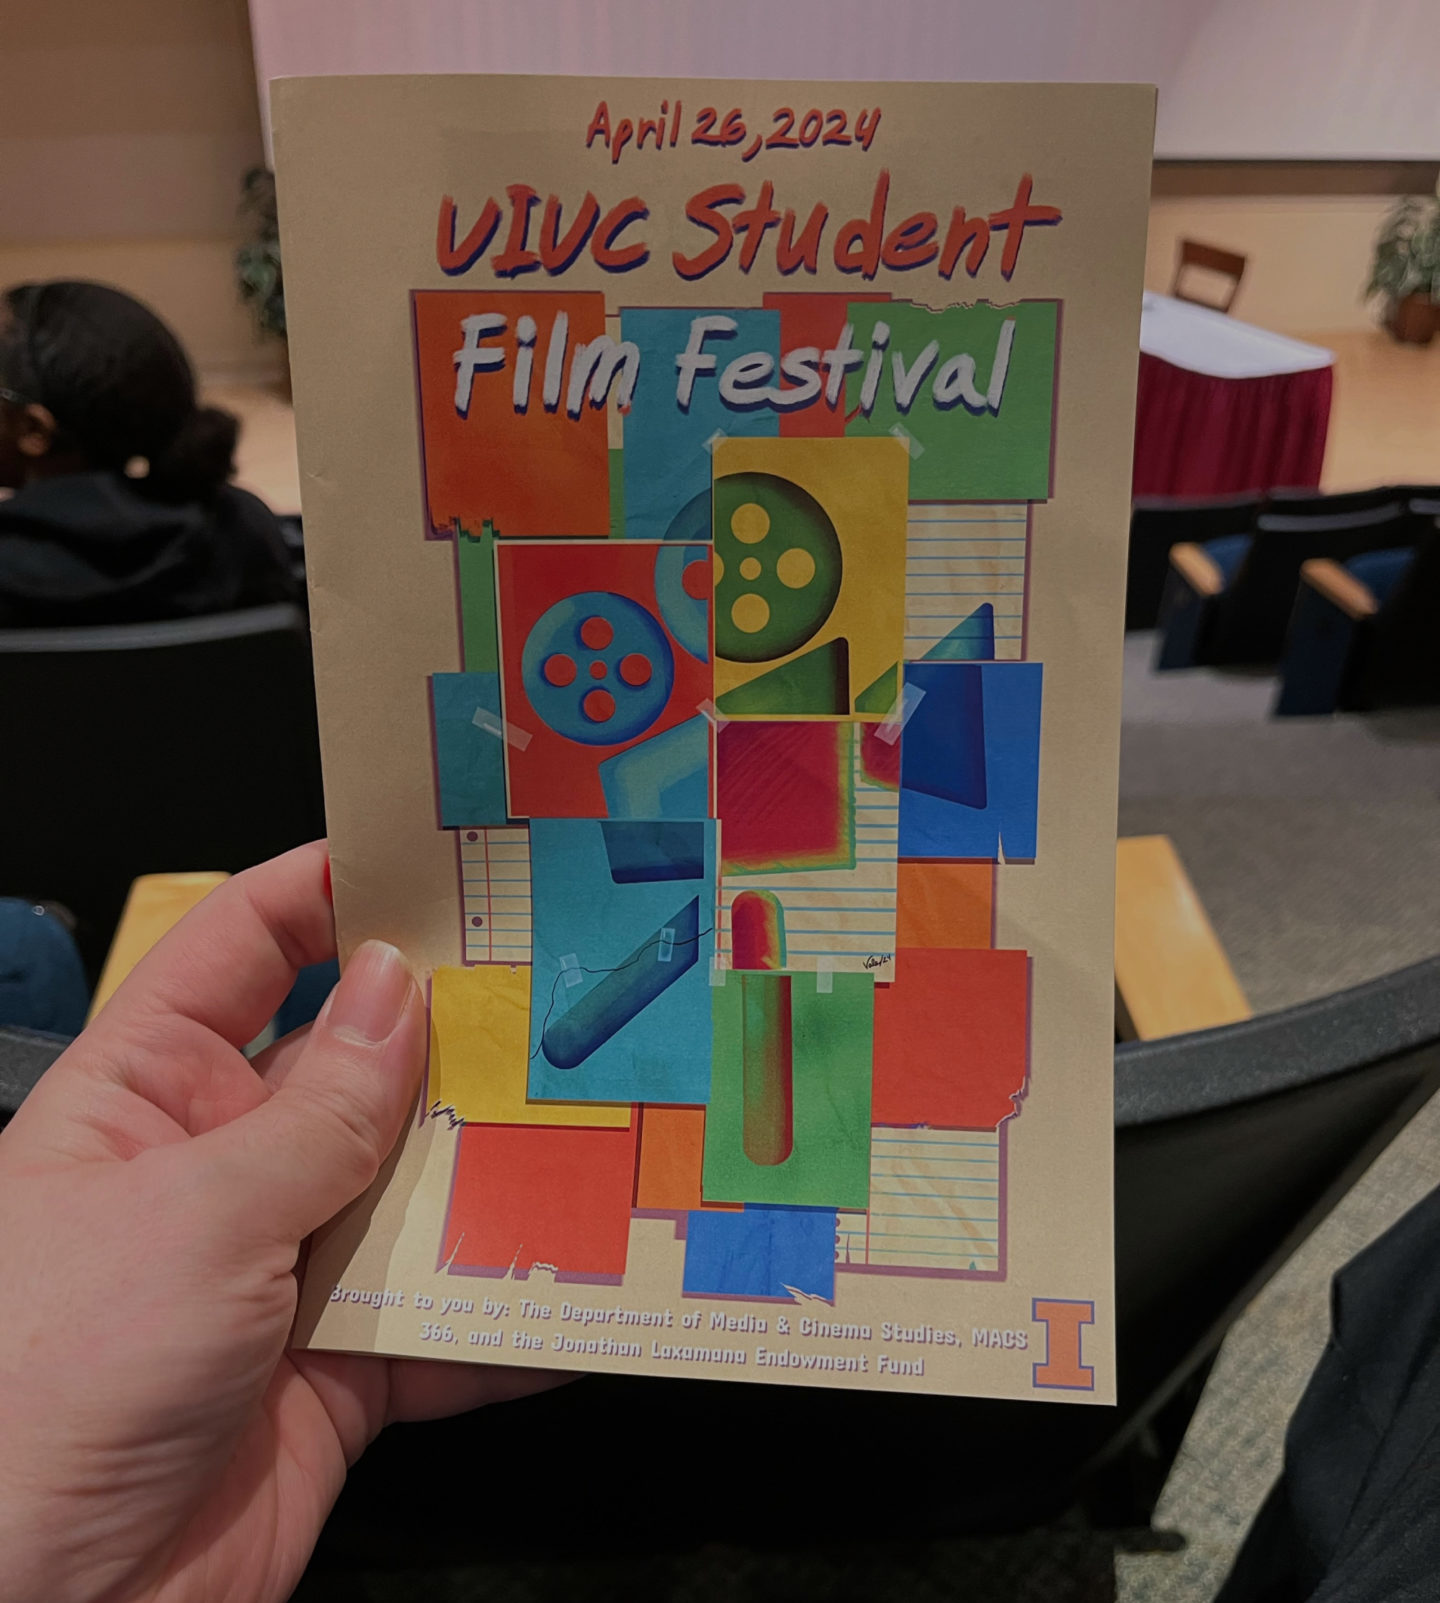 A white hand is holding a UIUC Student Film Festival program. The program has blocks of blue, yellow, and red with abstract images.